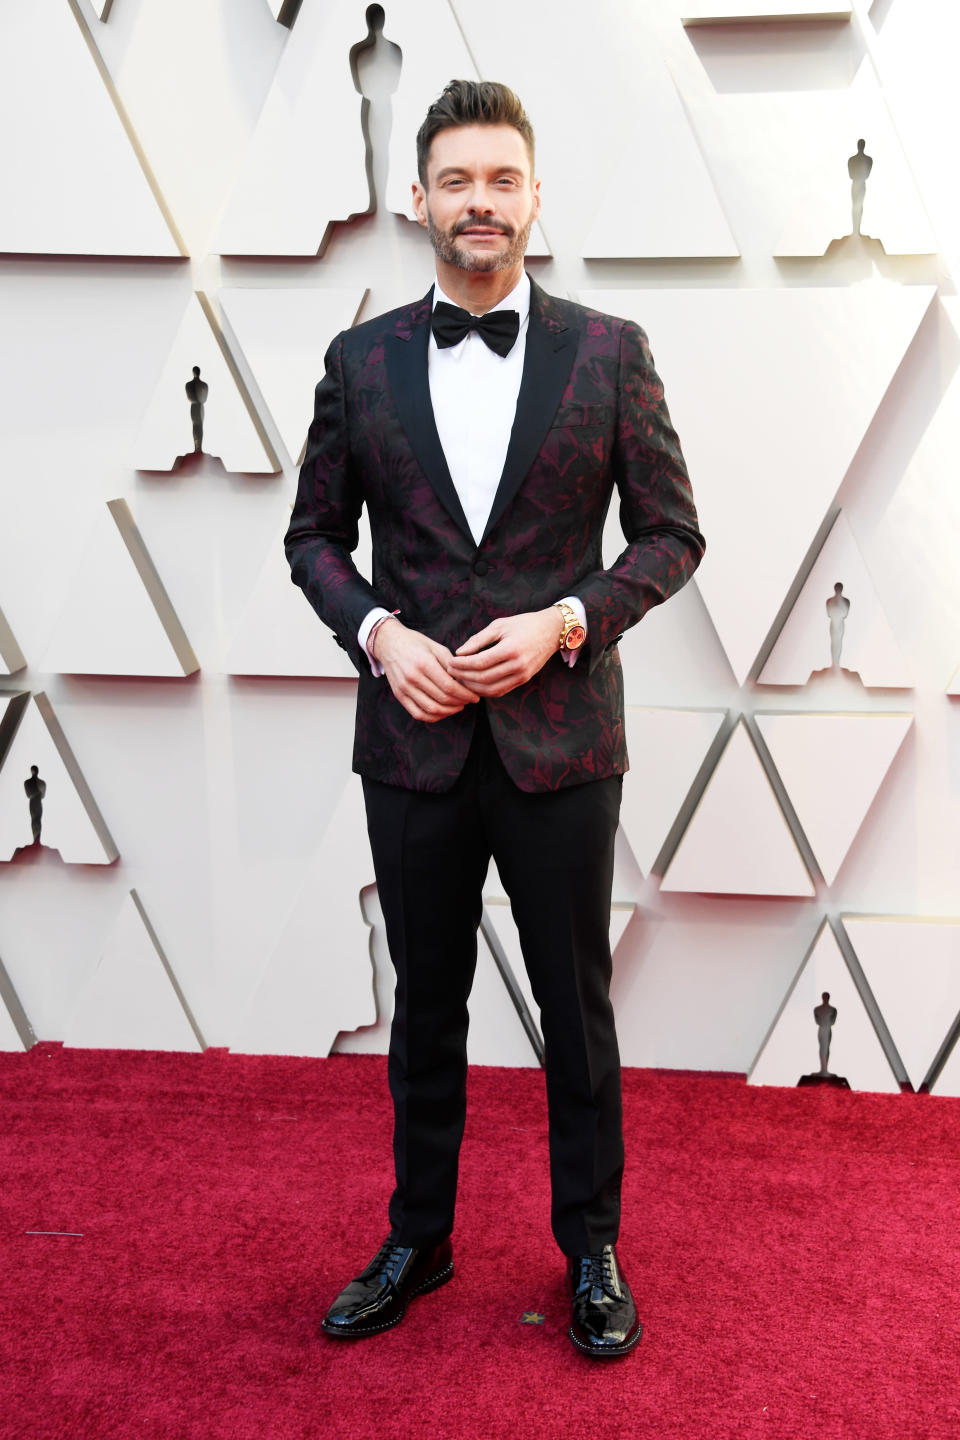 <p>Ryan Seacrest attends the 91st Academy Awards at the Dolby Theatre in Hollywood, Calif., on Feb. 24, 2019. (Photo: Getty Images) </p>